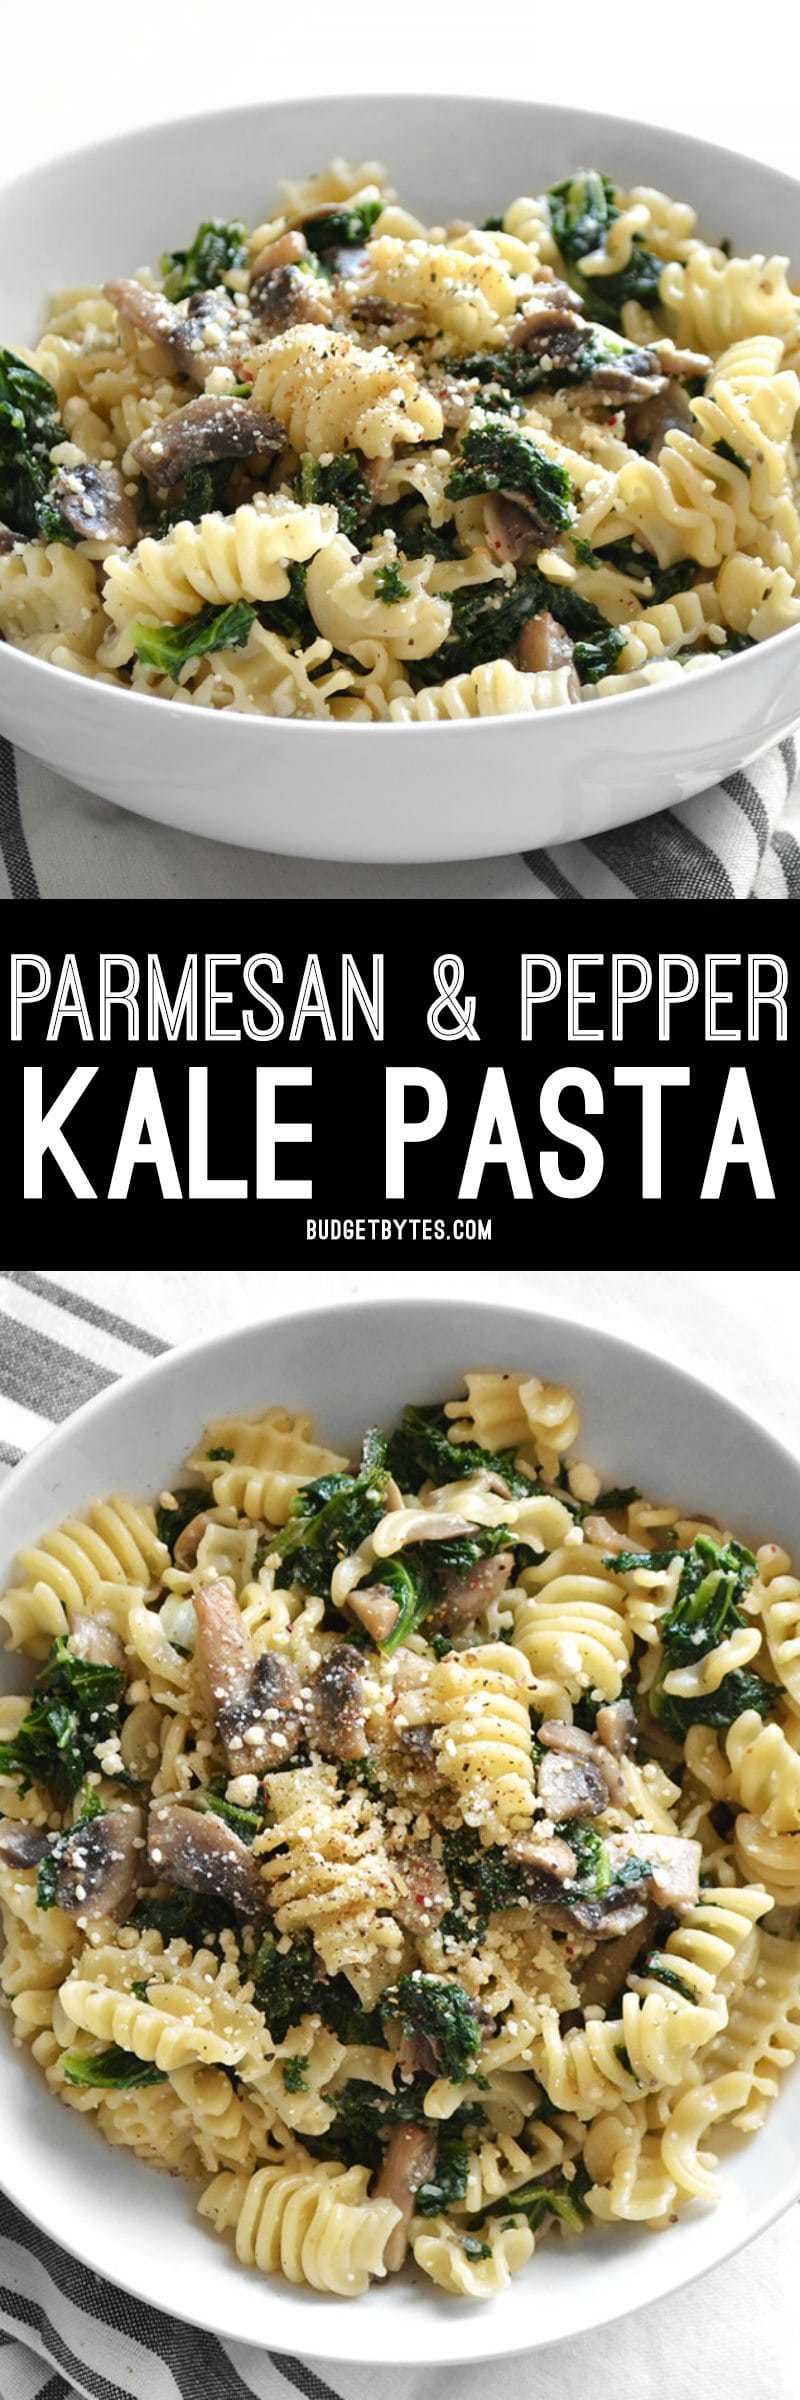 Parmesan & Pepper Kale Pasta is a quick and easy weeknight meal. Just a few ingredients transform boring pasta into a fancy meal. BudgetBytes.com